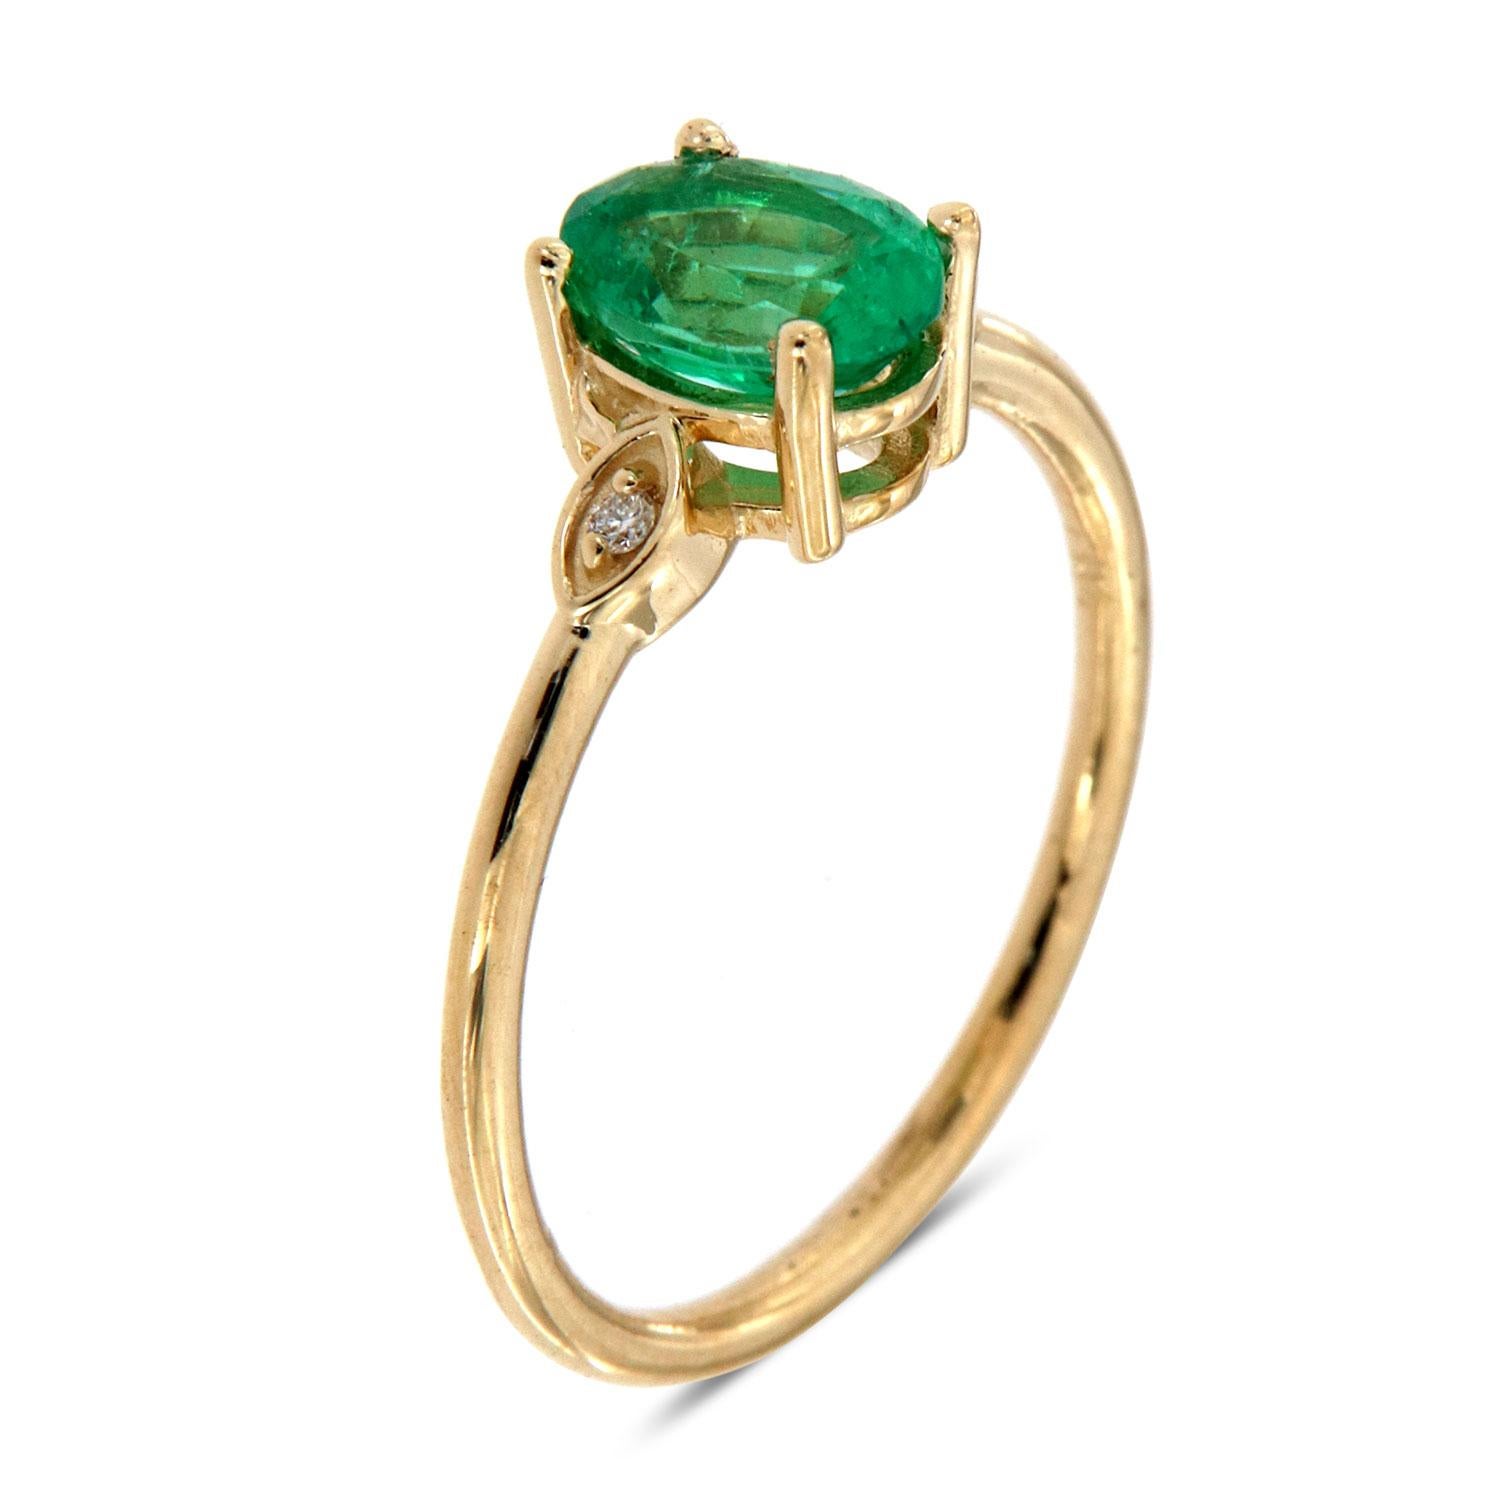 This Delicate Organicly designed ring features a 0.79 Carat Oval Shaped Ethiopian Green Emerald flanked by two round brilliant diamonds in weight of 0.02 Carat set in a Marquise shaped crown. The emerald is sparkling and full of life. Its color is